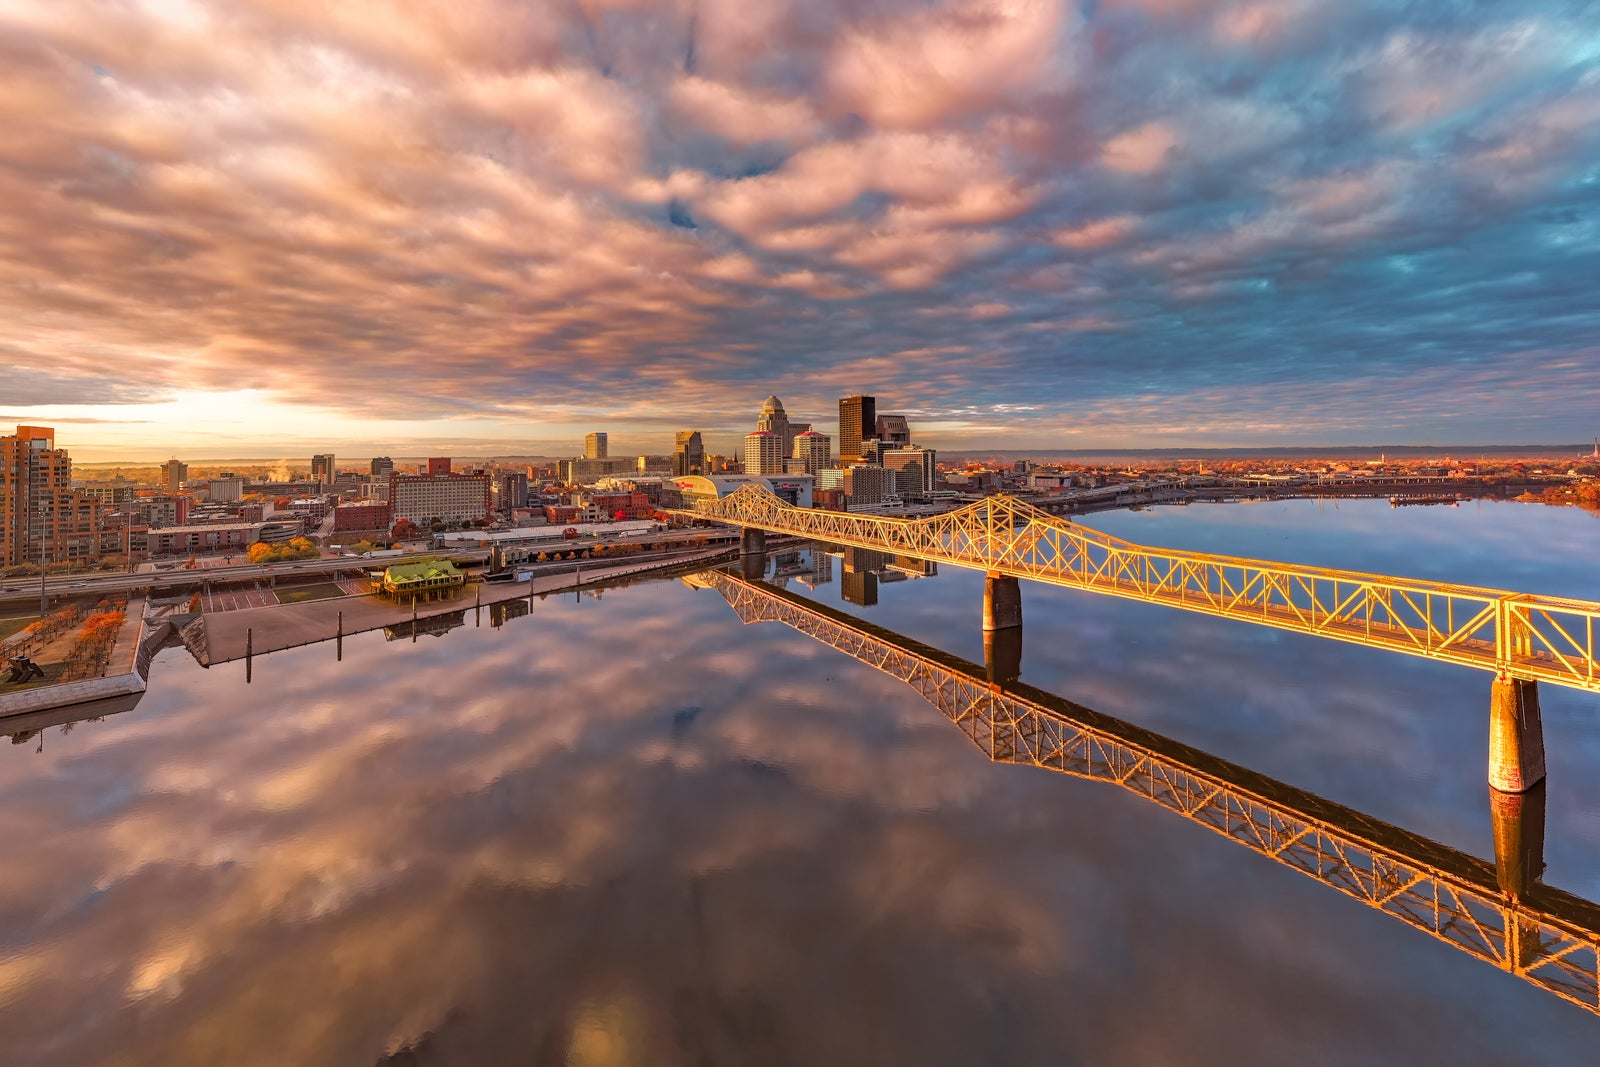 Beautiful shot of Louisville in the evening